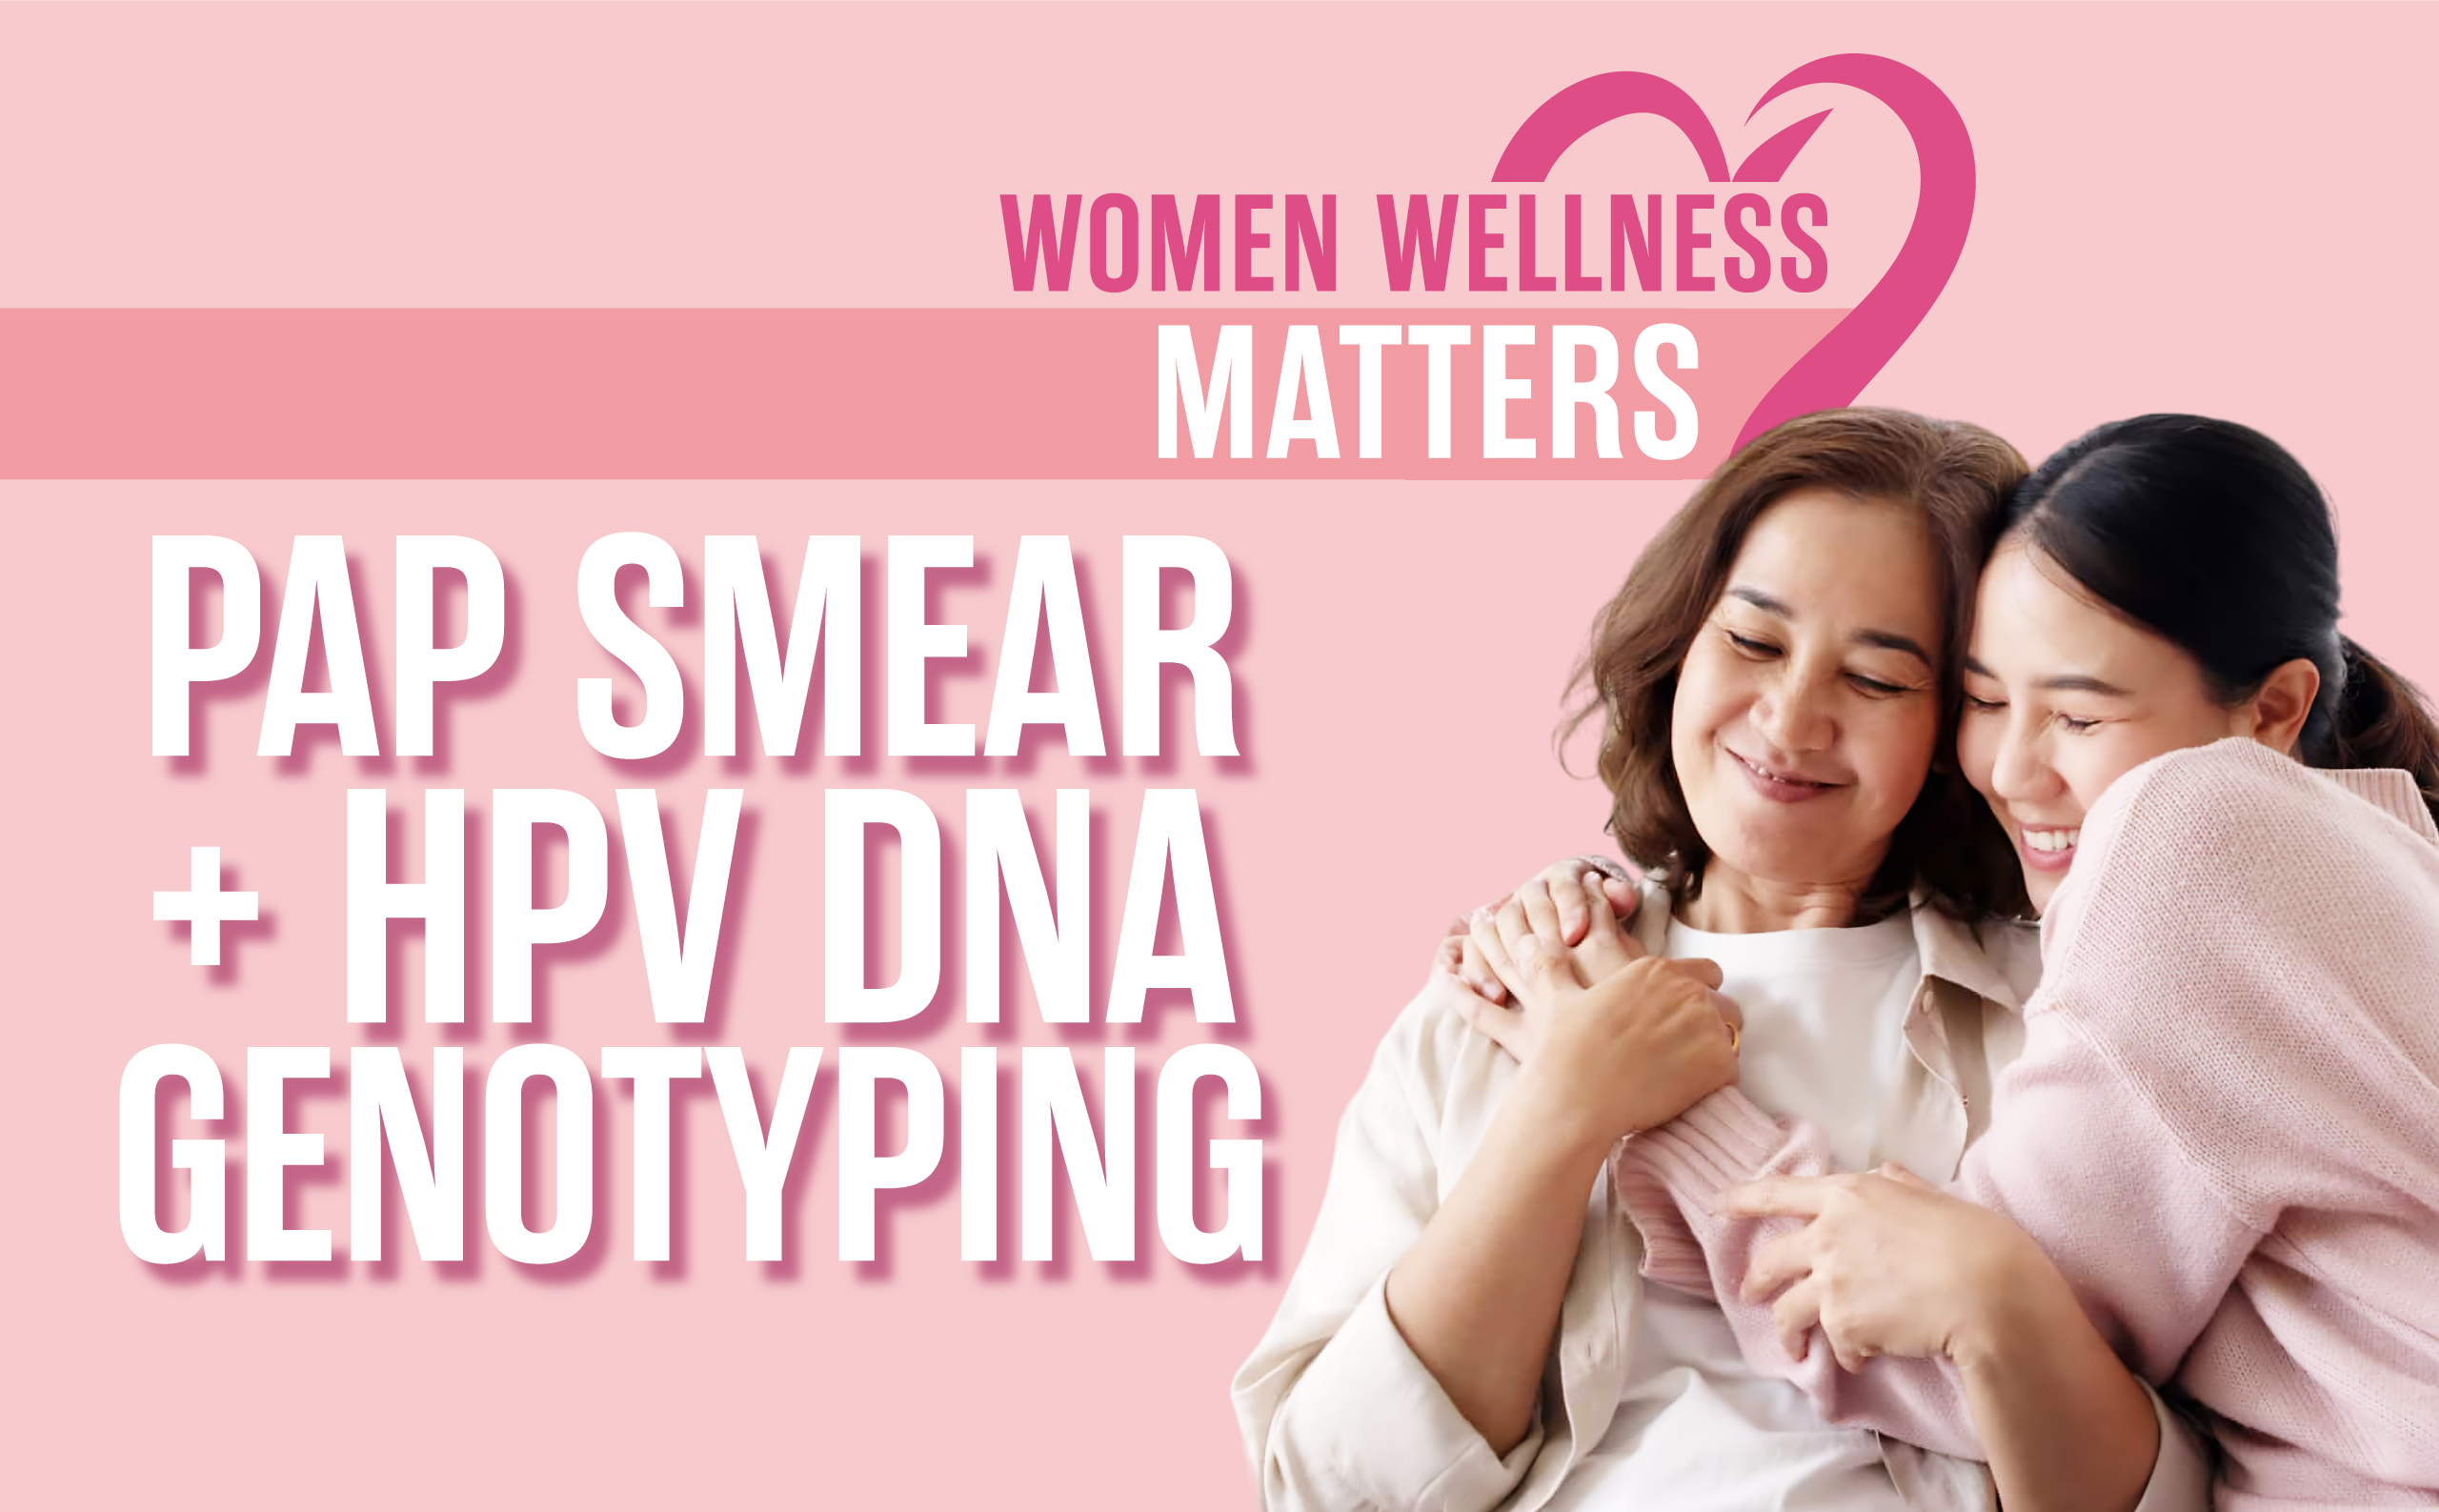 pap smear + hpv dna genotyping